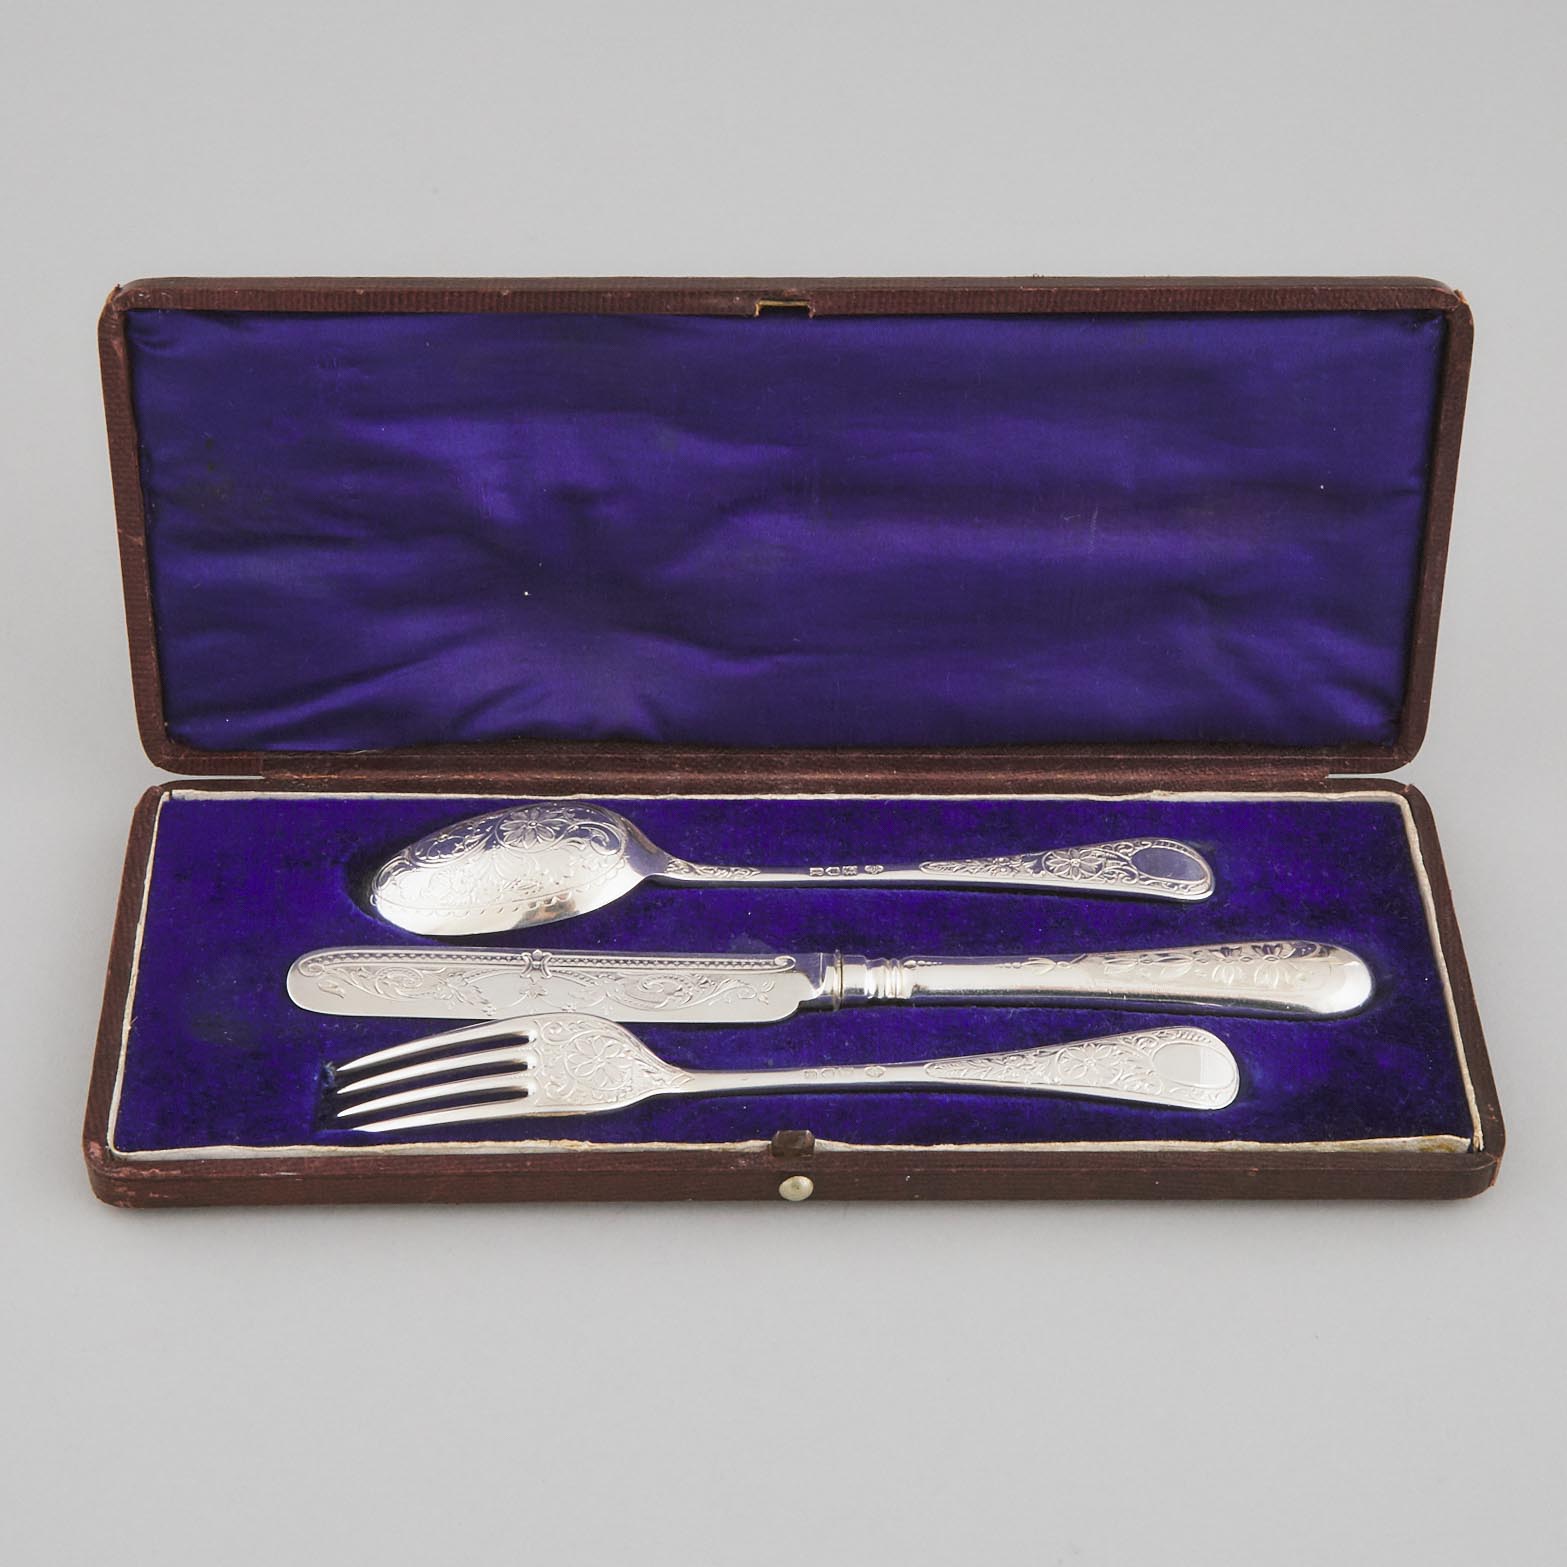 Edwardian Silver Child's Fork and Spoon, William Hutton & Sons, London, 1901